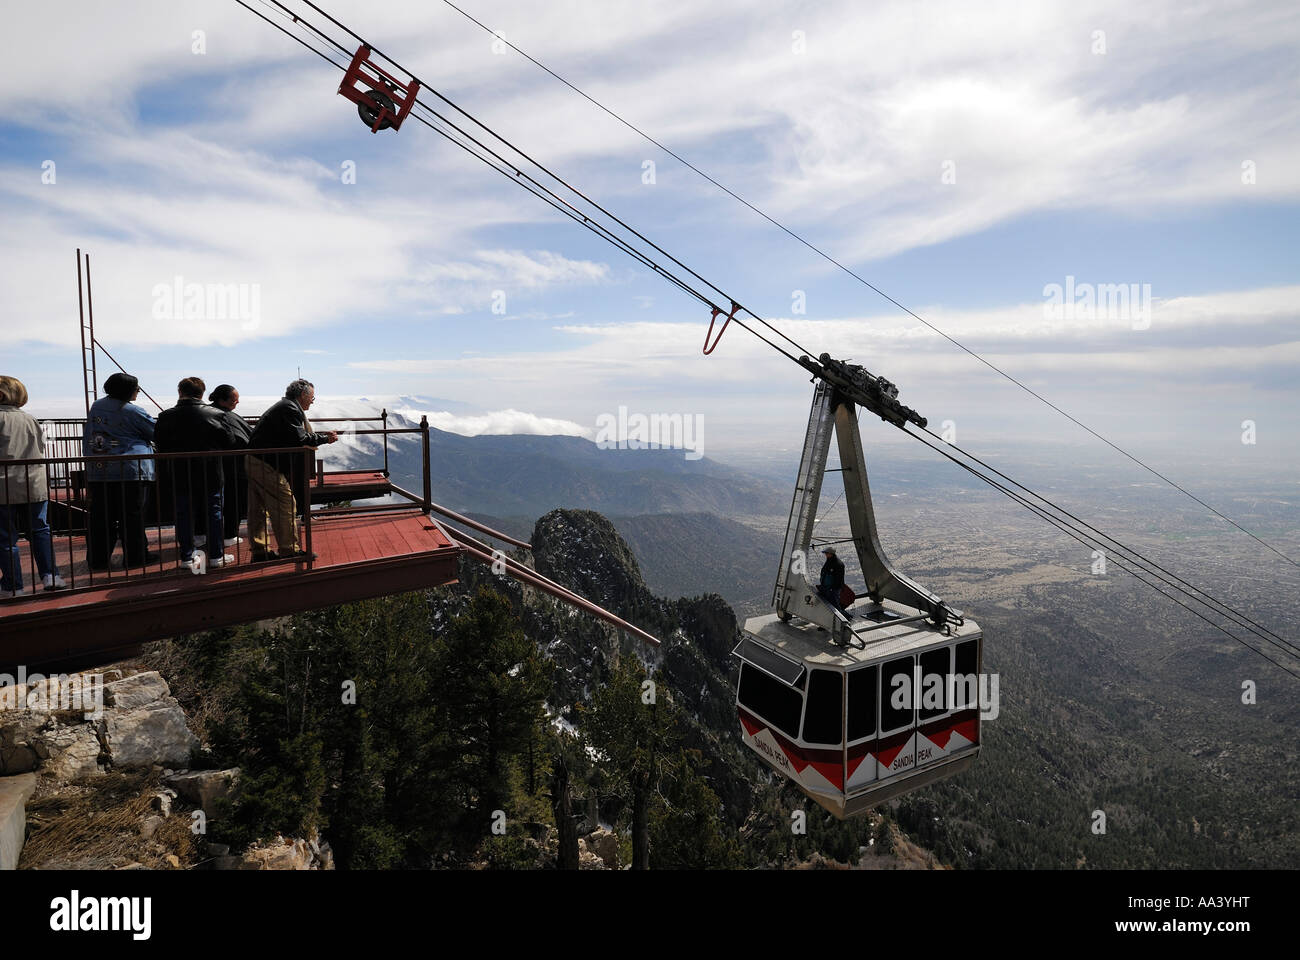 Albuquerque, New Mexico, take from the top of the Sandia Tramway. Stock Photo